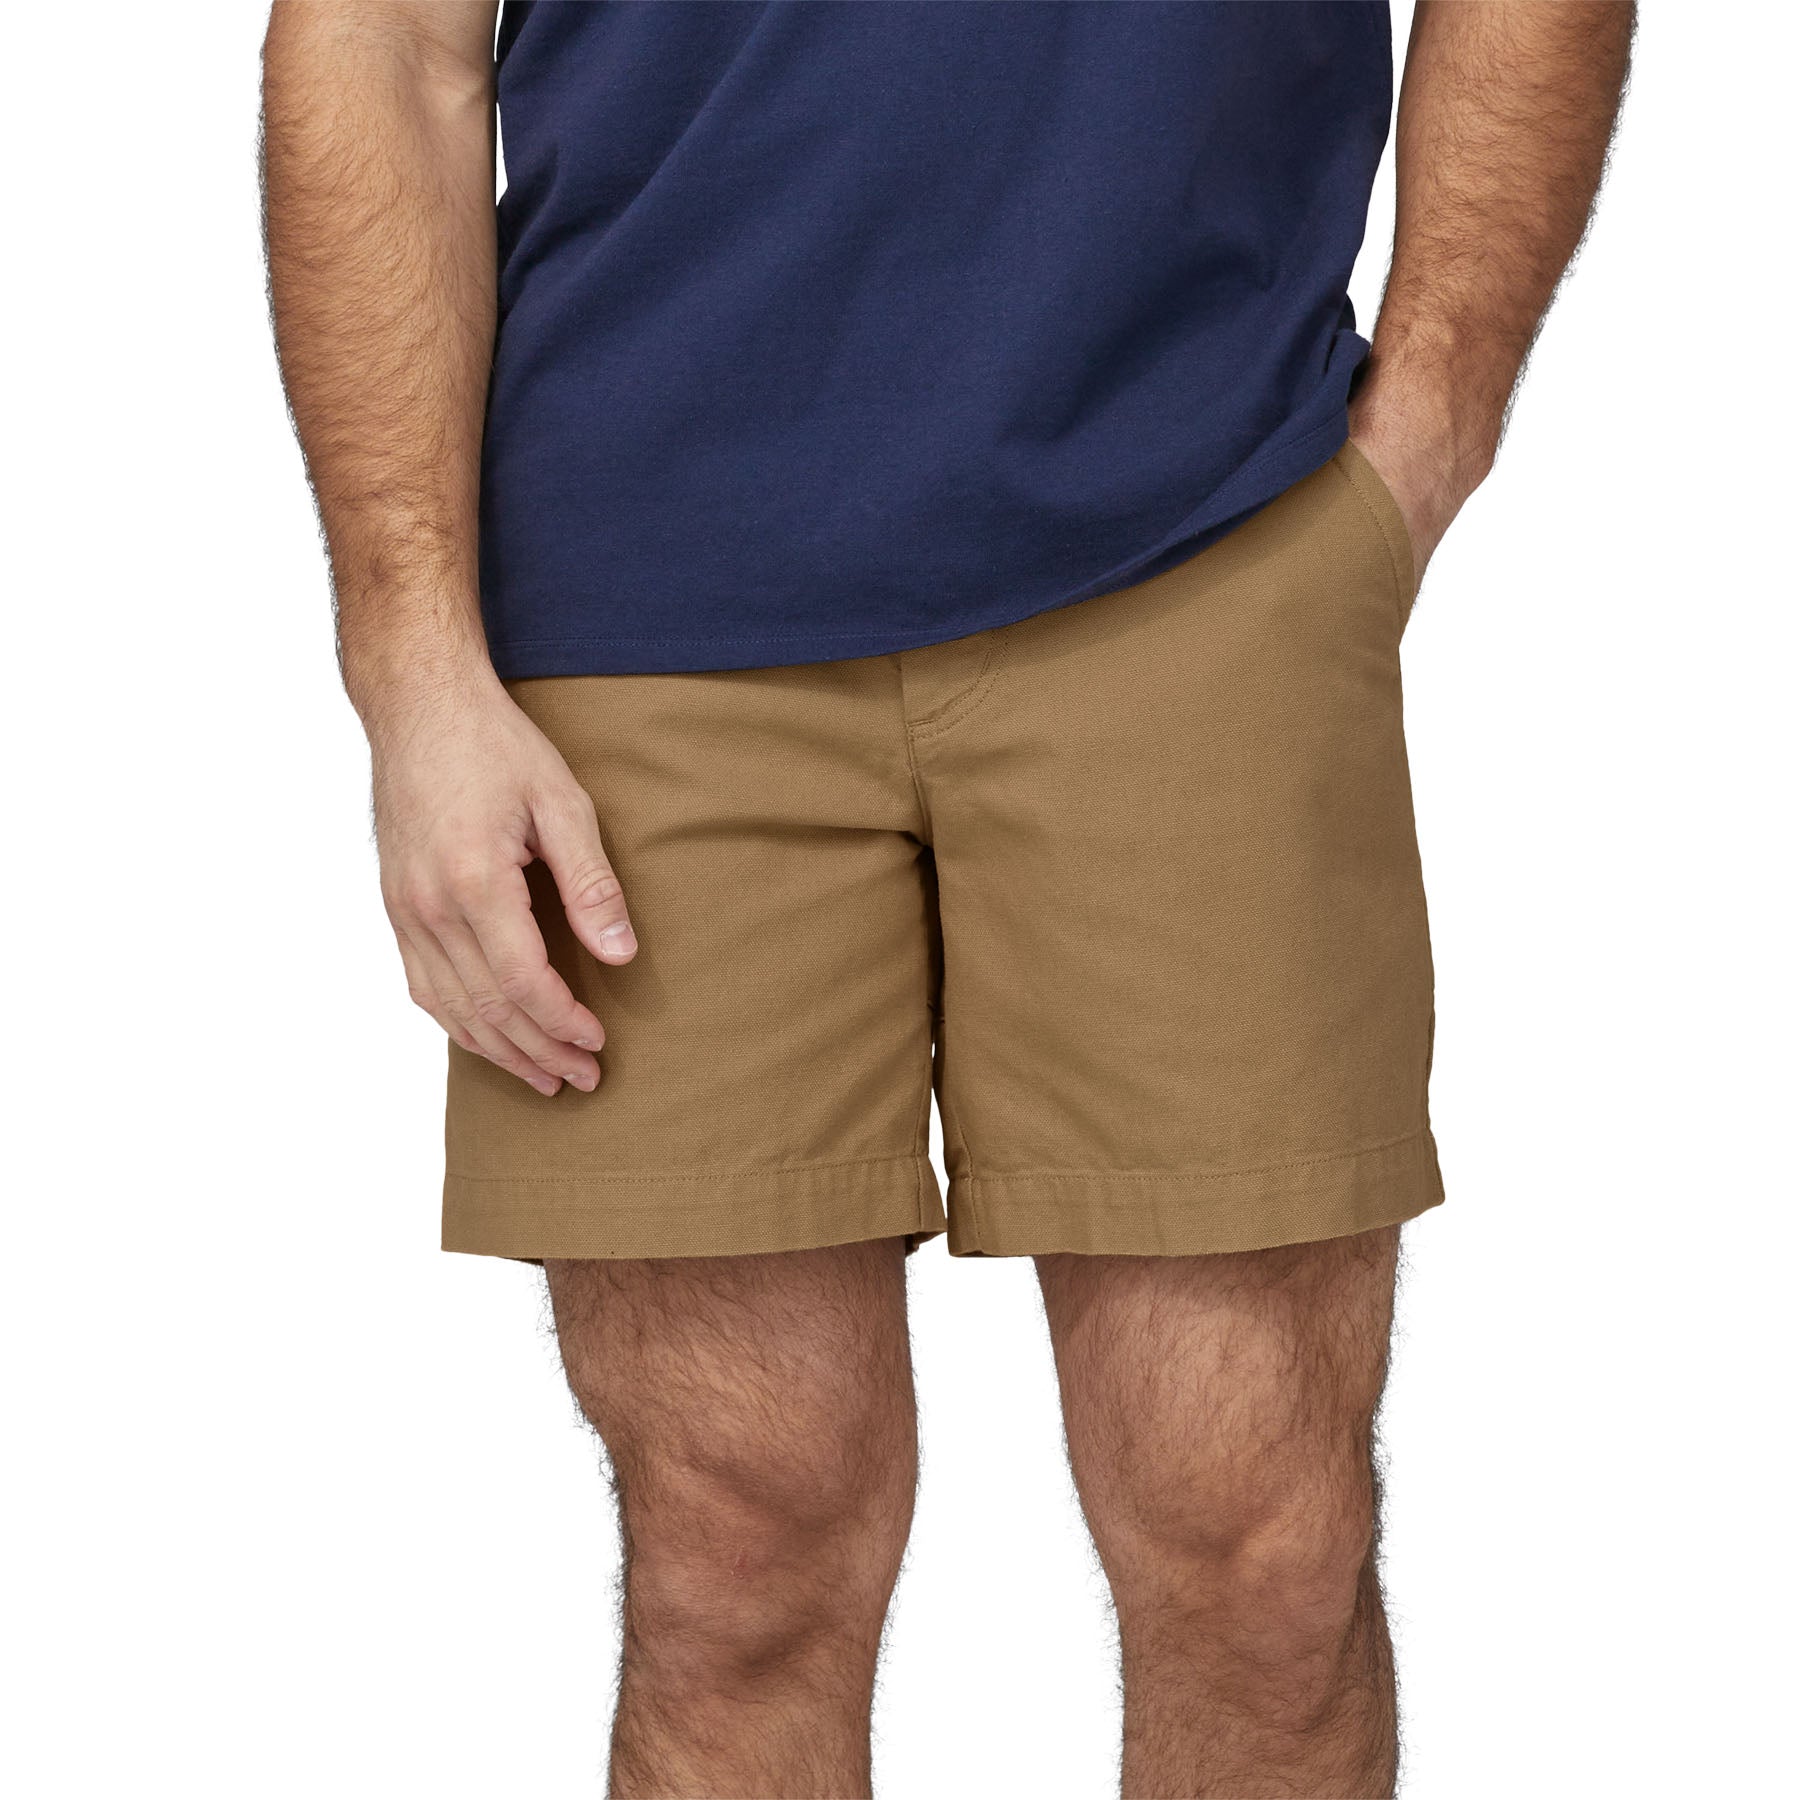 Men's Heritage Stand Up Shorts - 7 in.